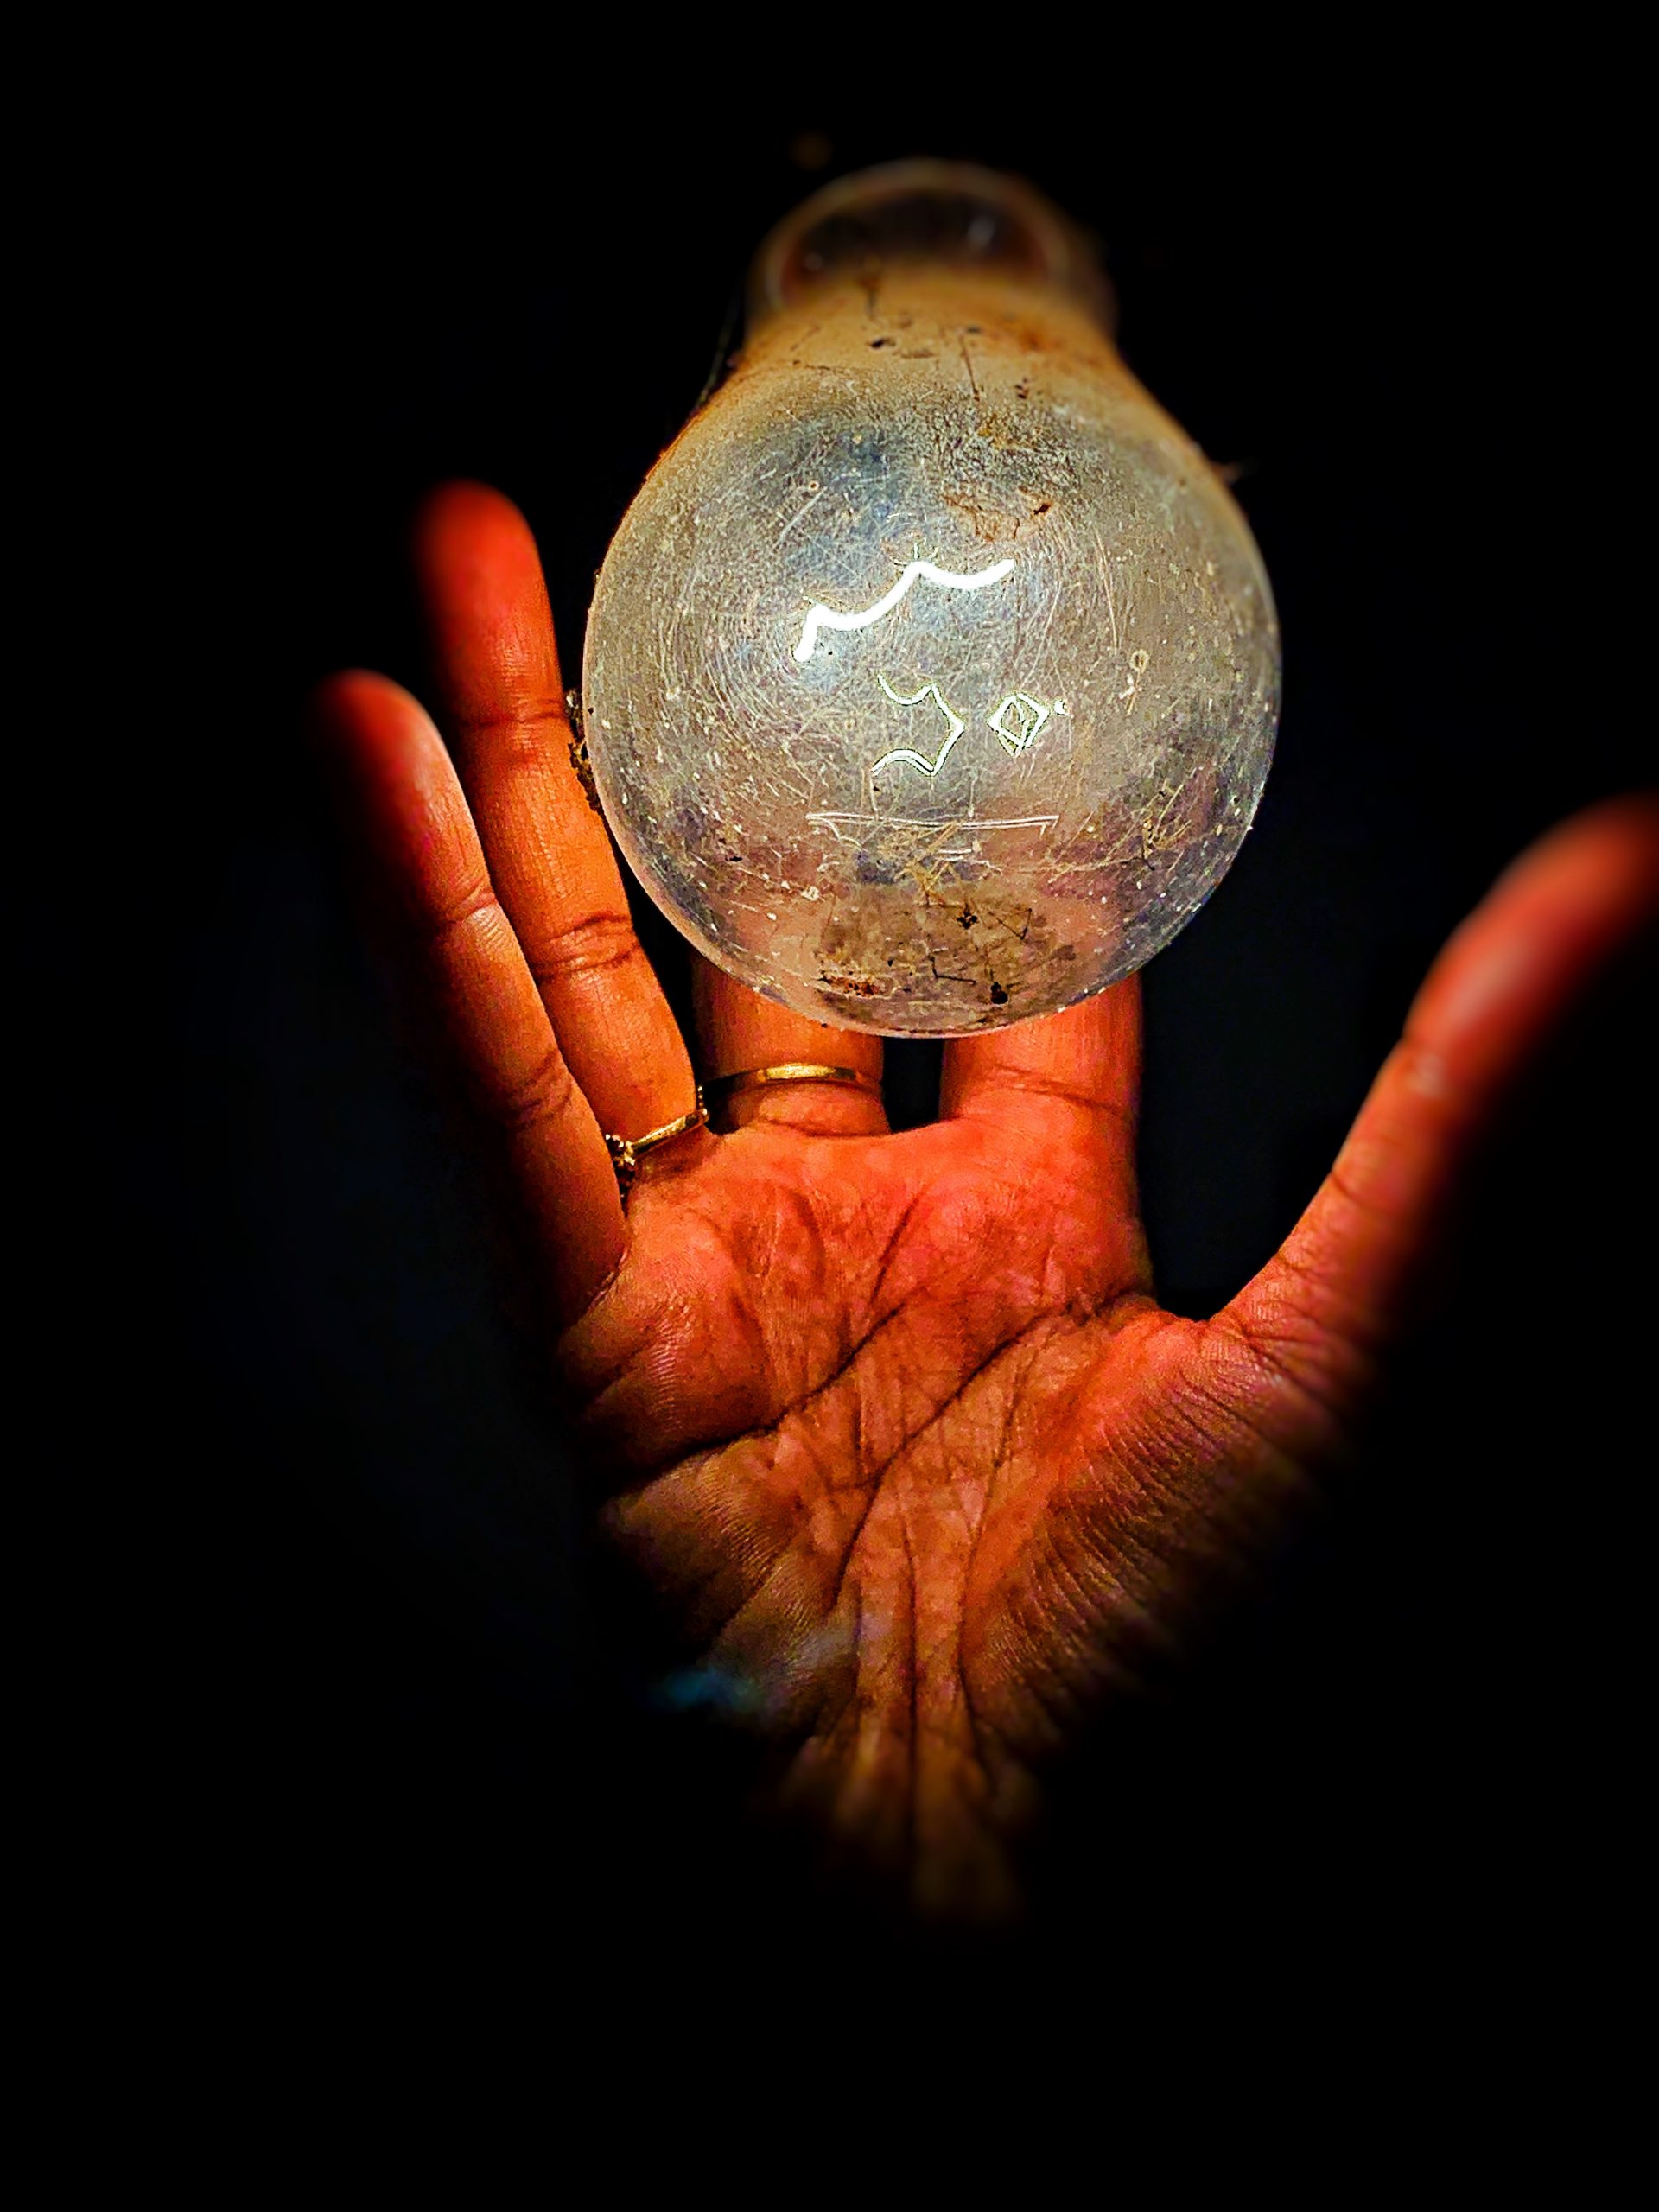 An old electric bulb